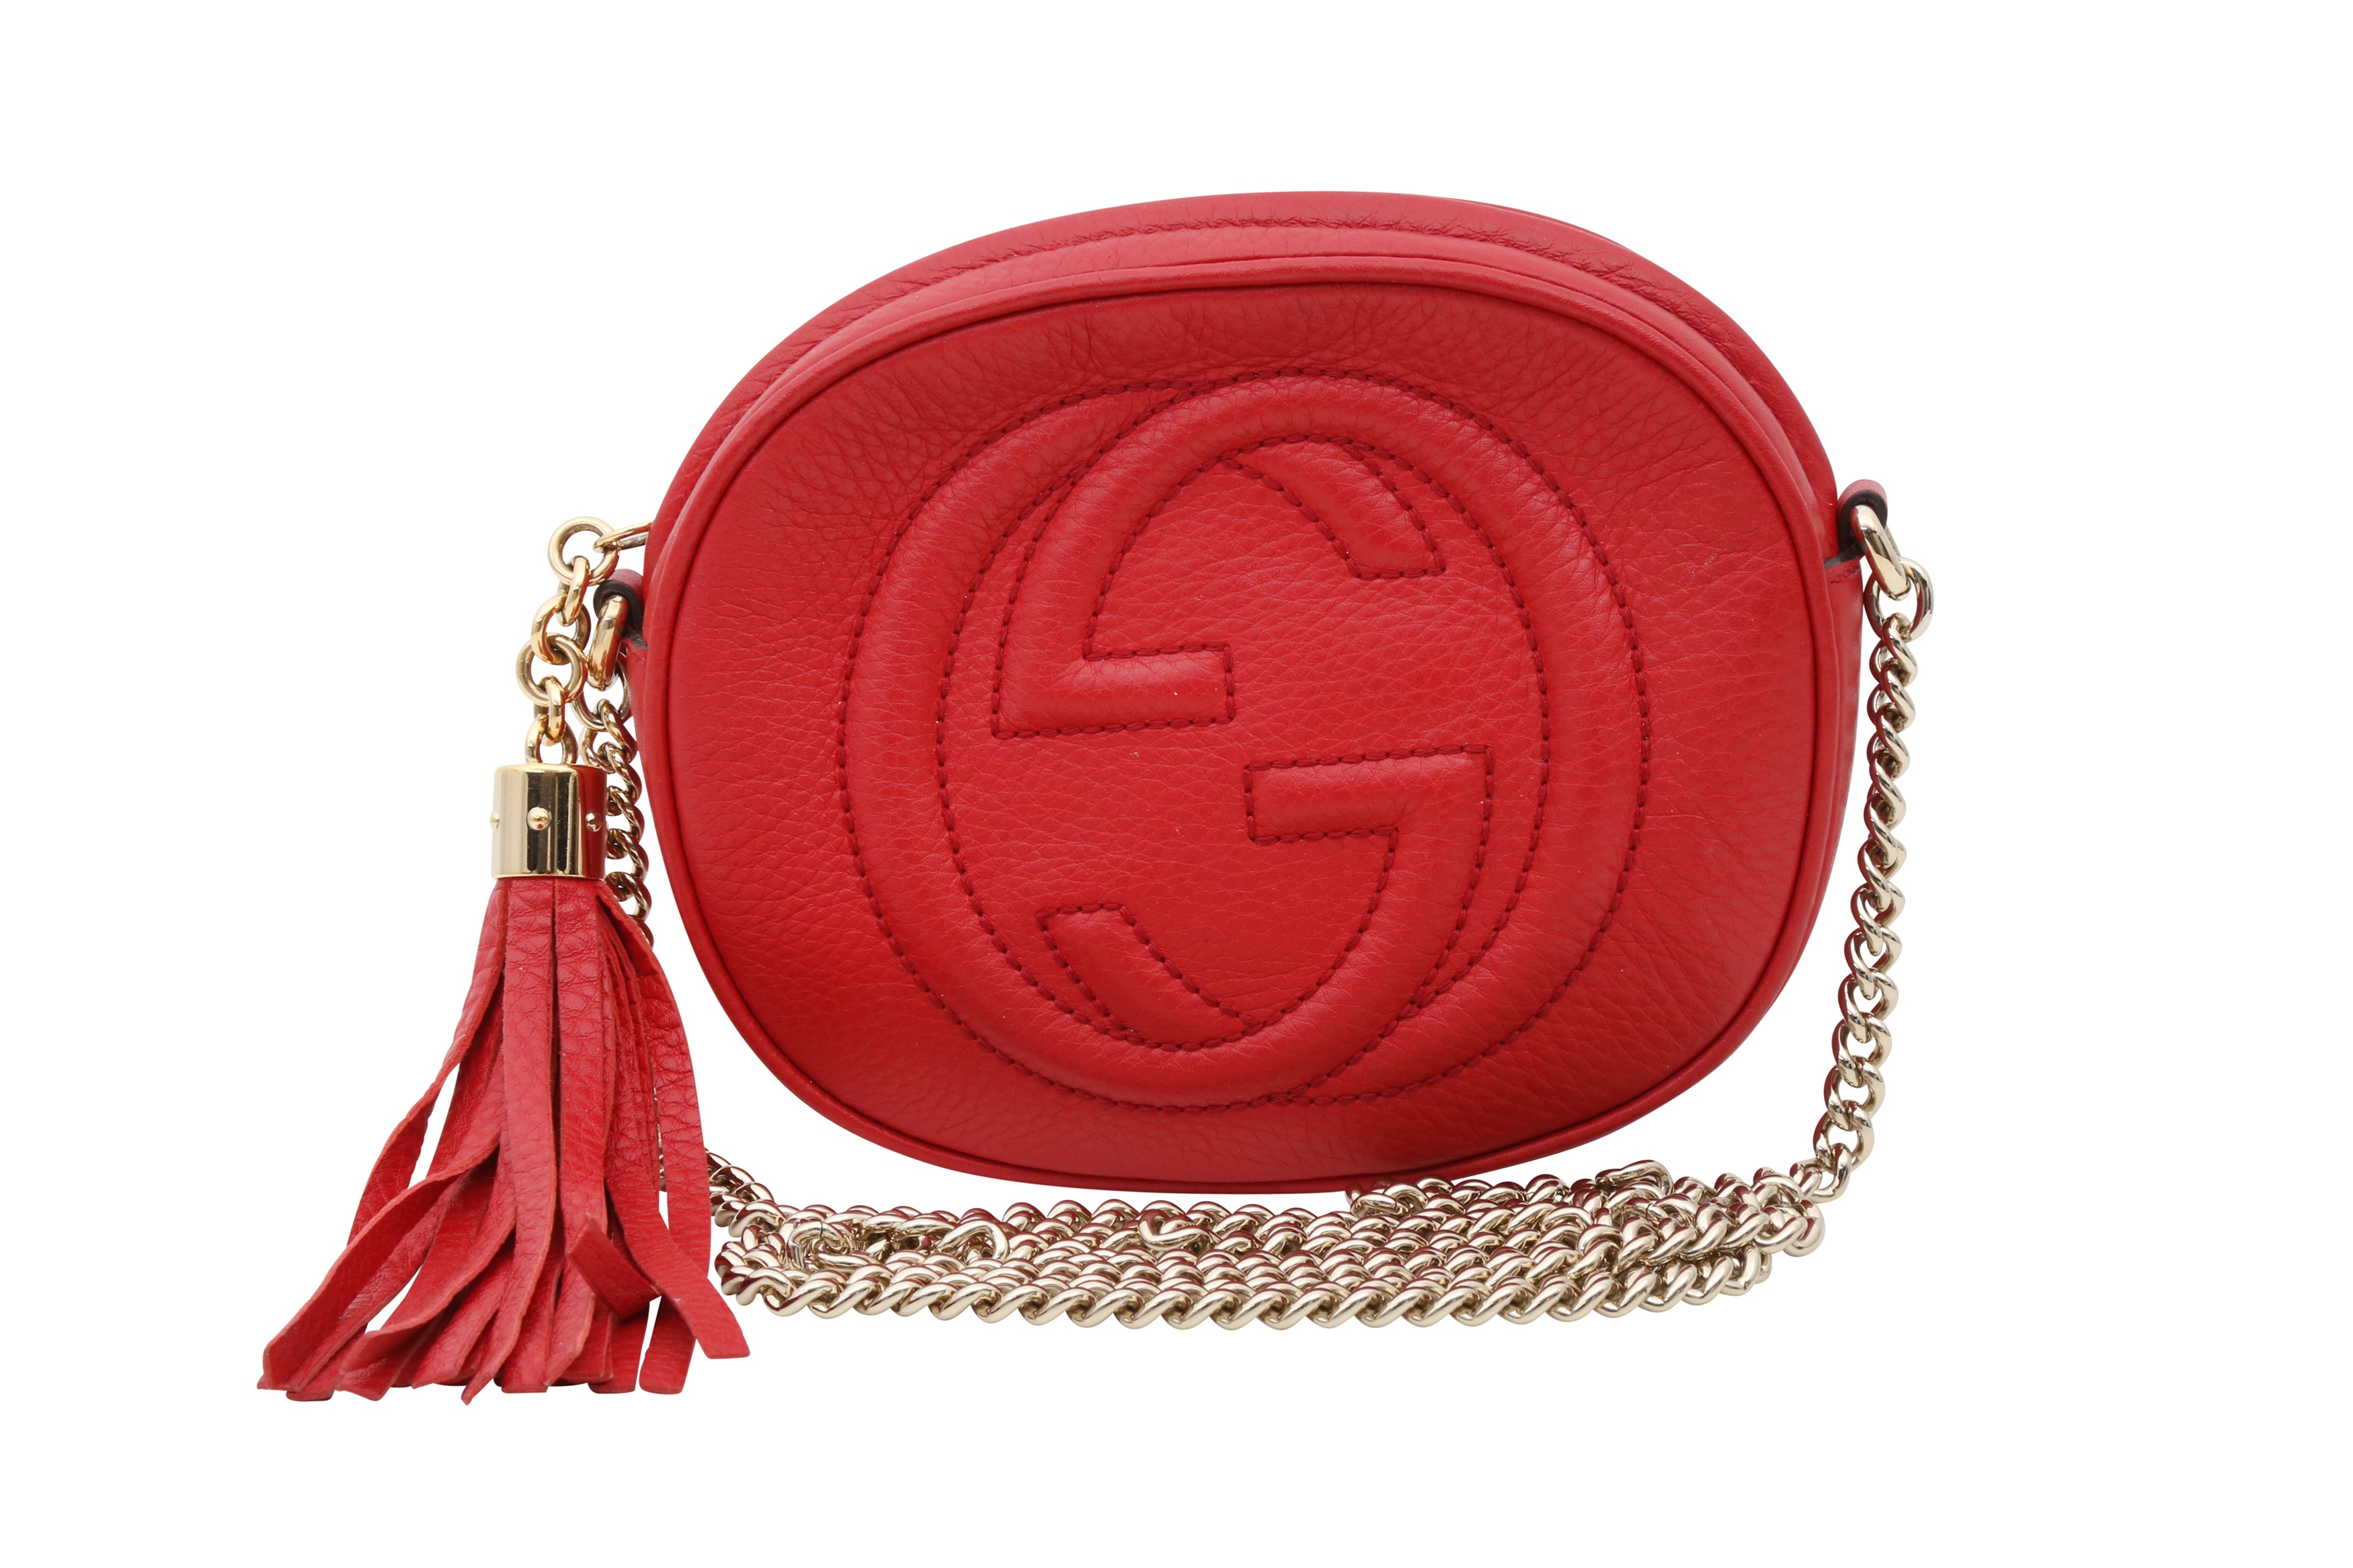 Gucci Soho Disco Bag Discontinued - Where to buy it in 2023?